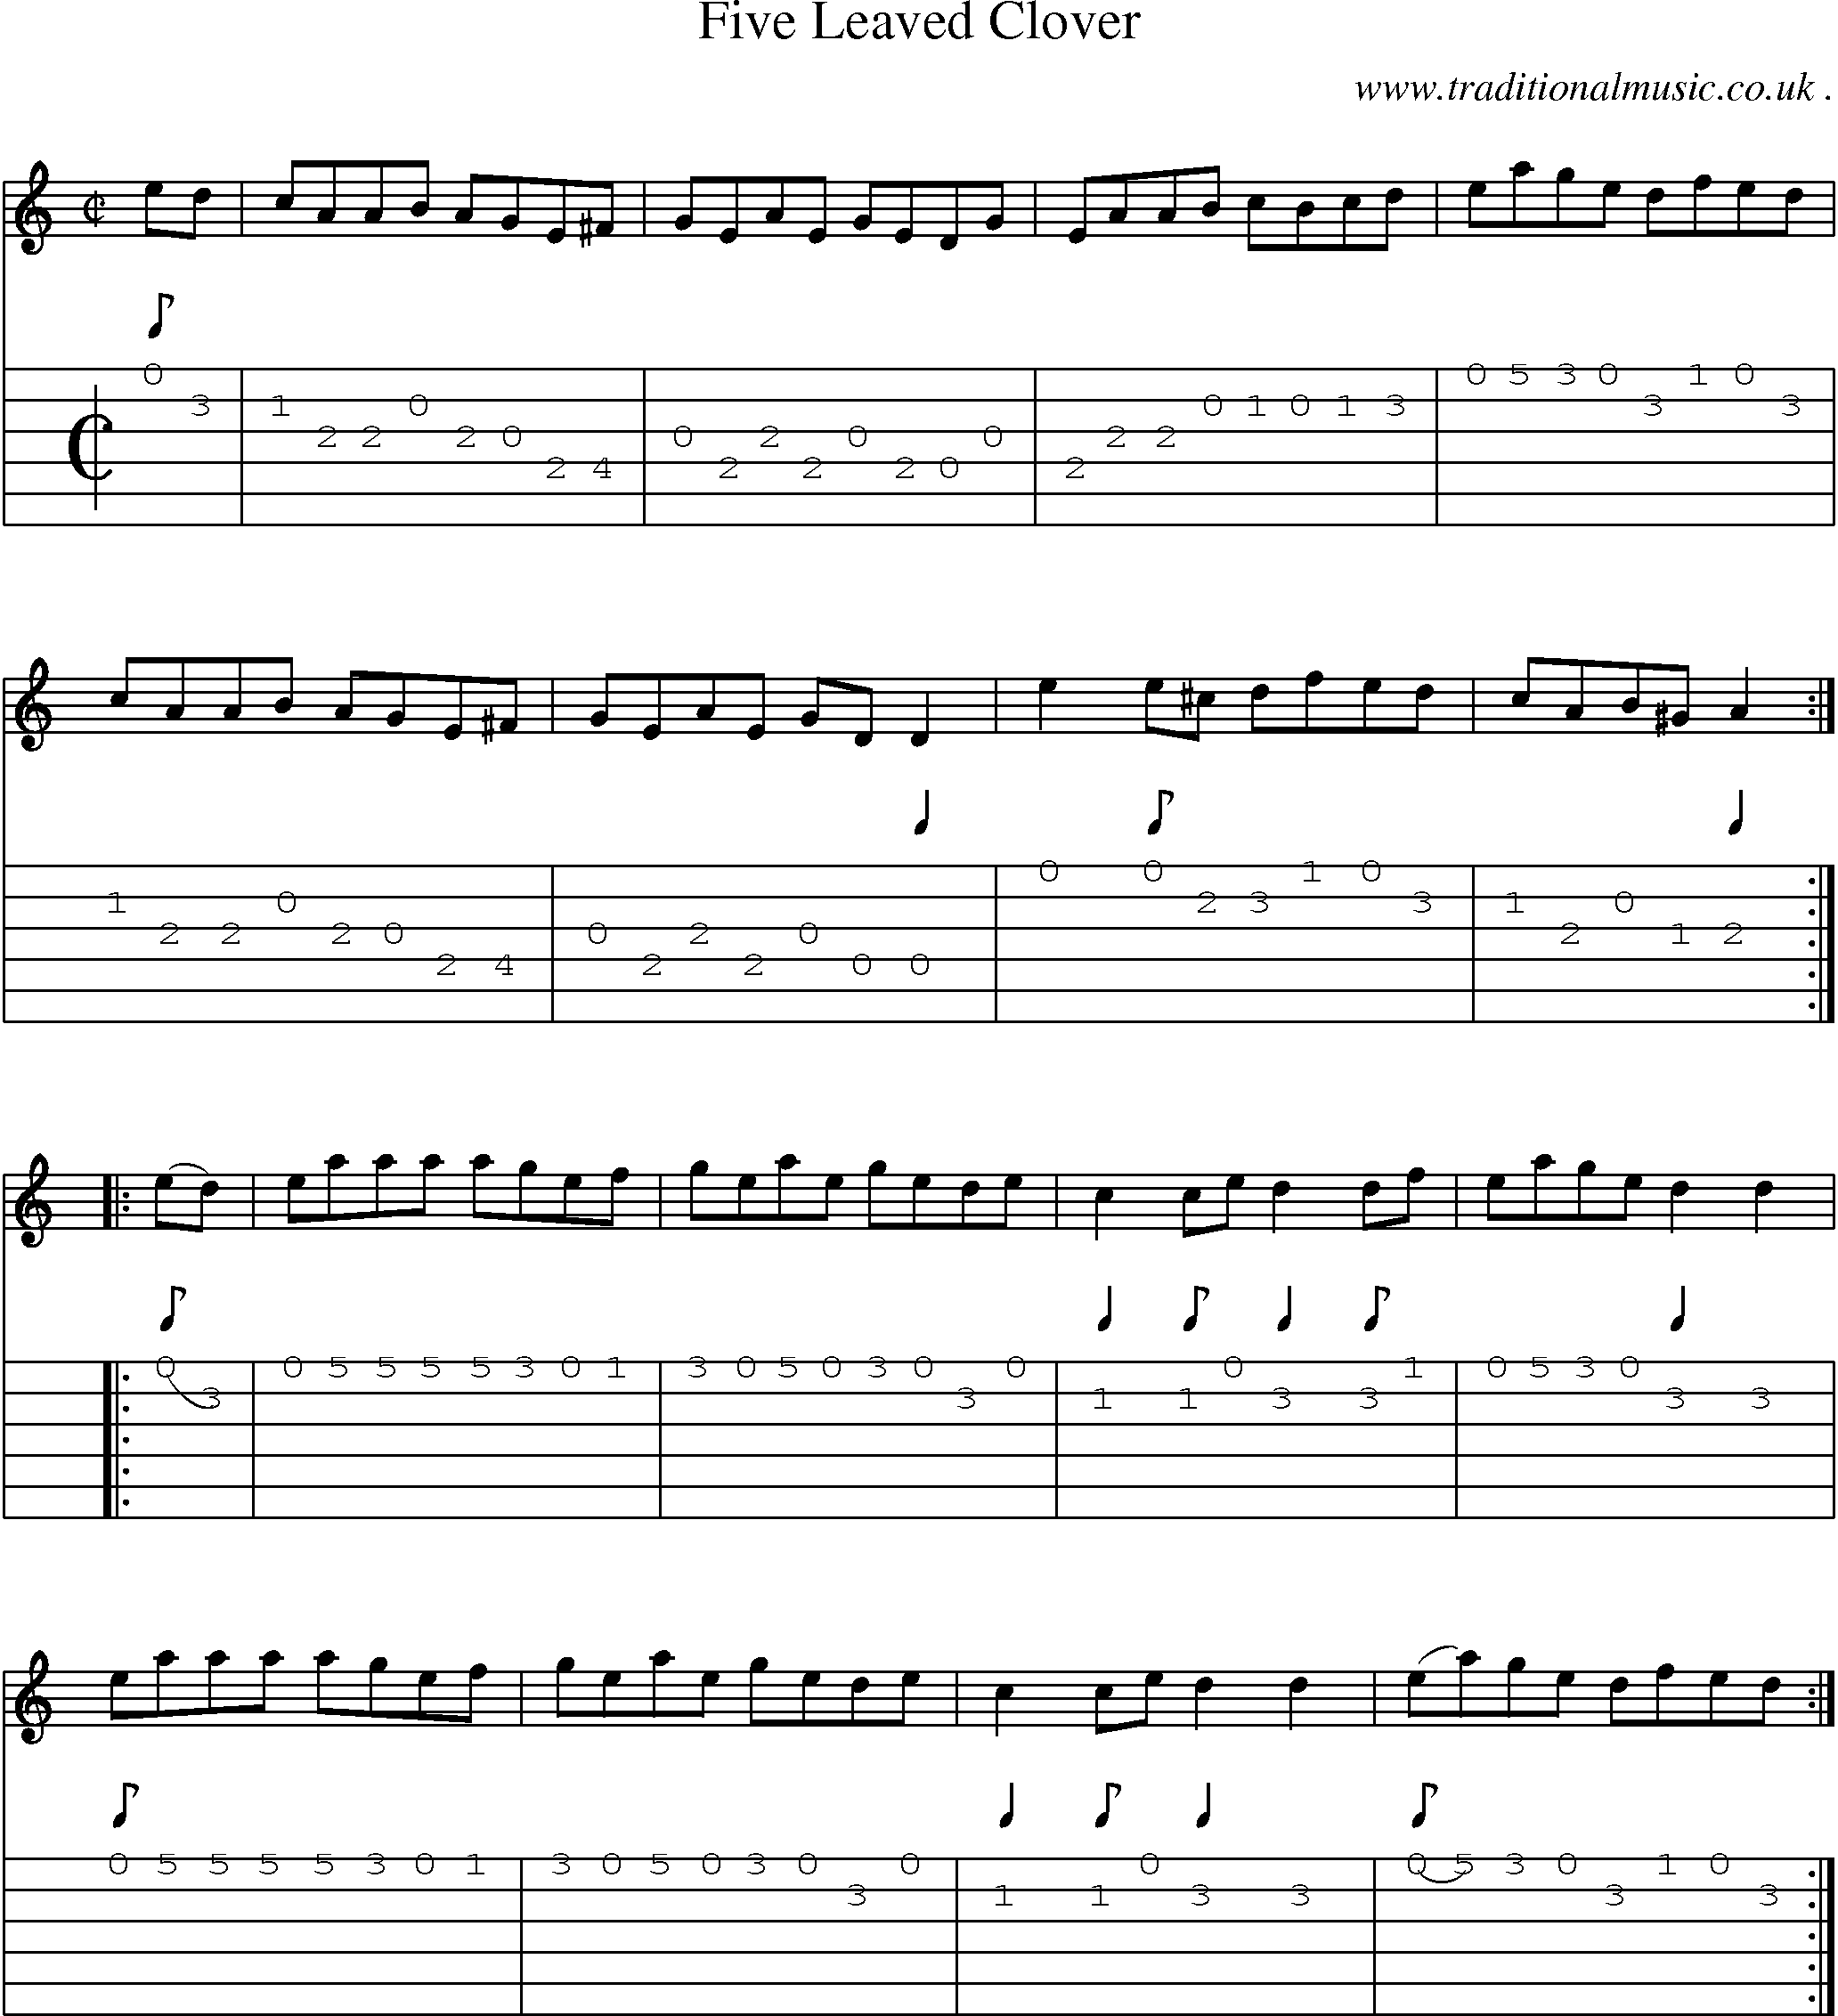 Sheet-Music and Guitar Tabs for Five Leaved Clover